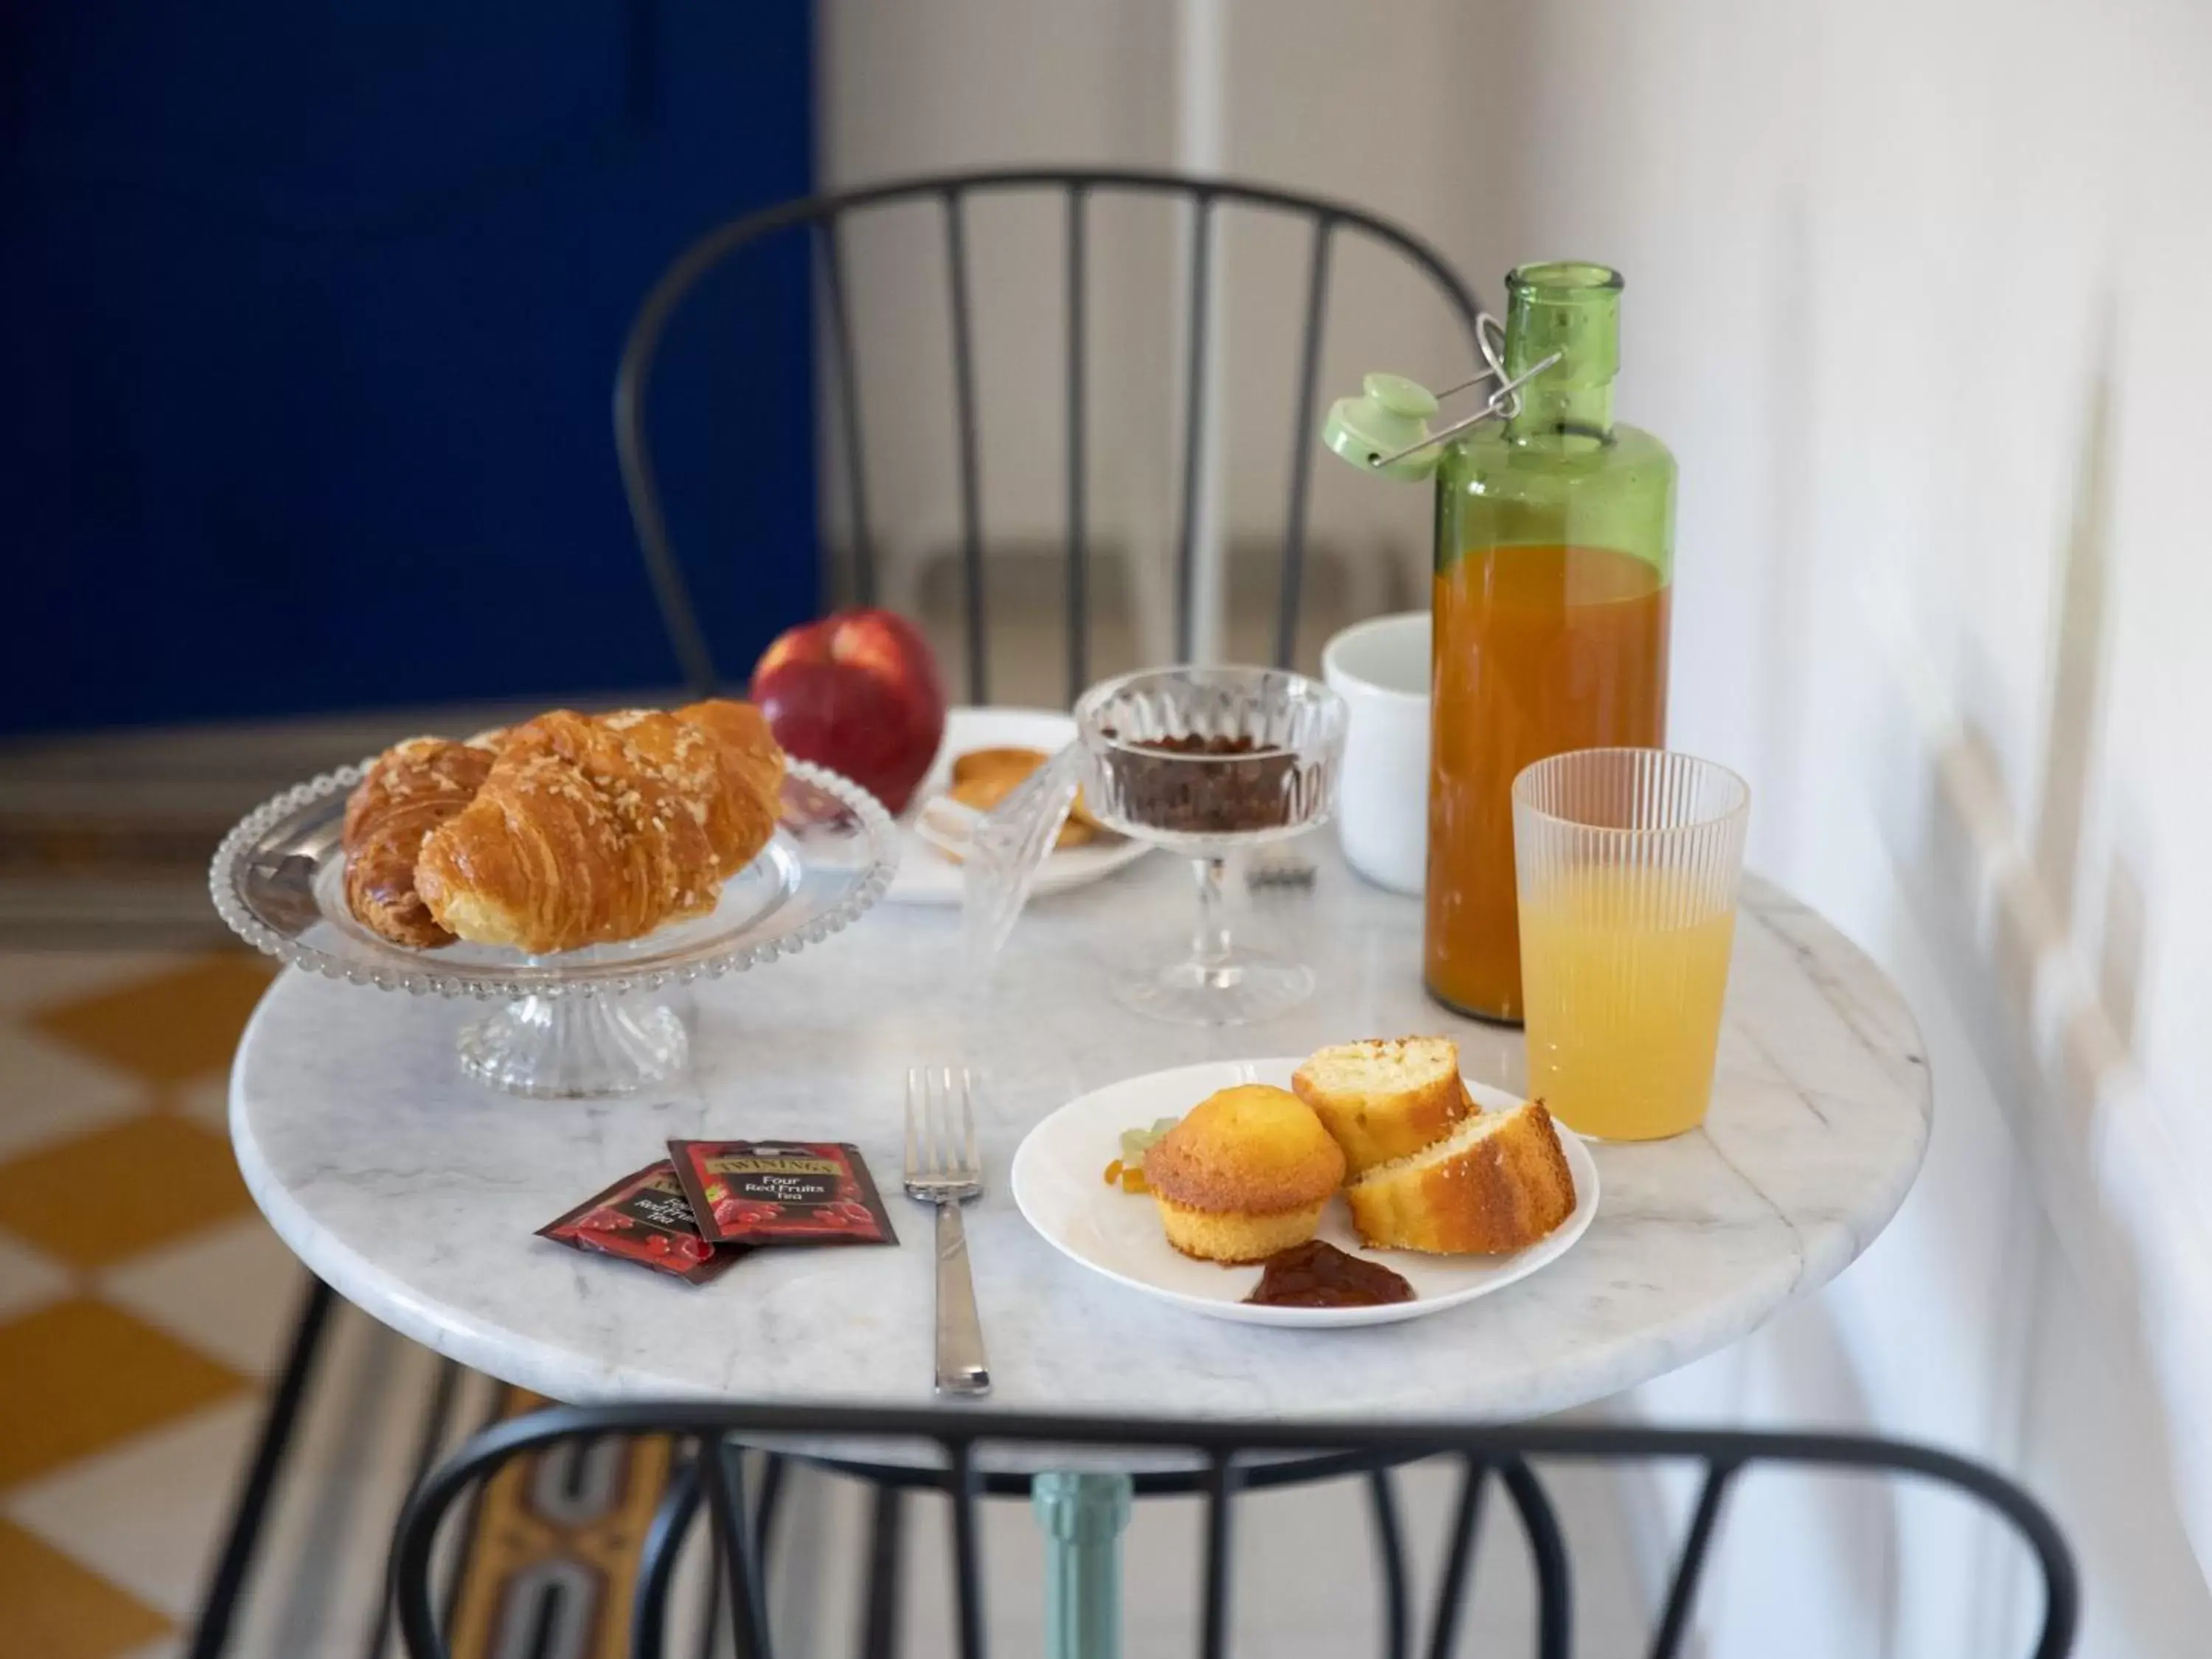 Food and drinks, Breakfast in Salotto Borbonico